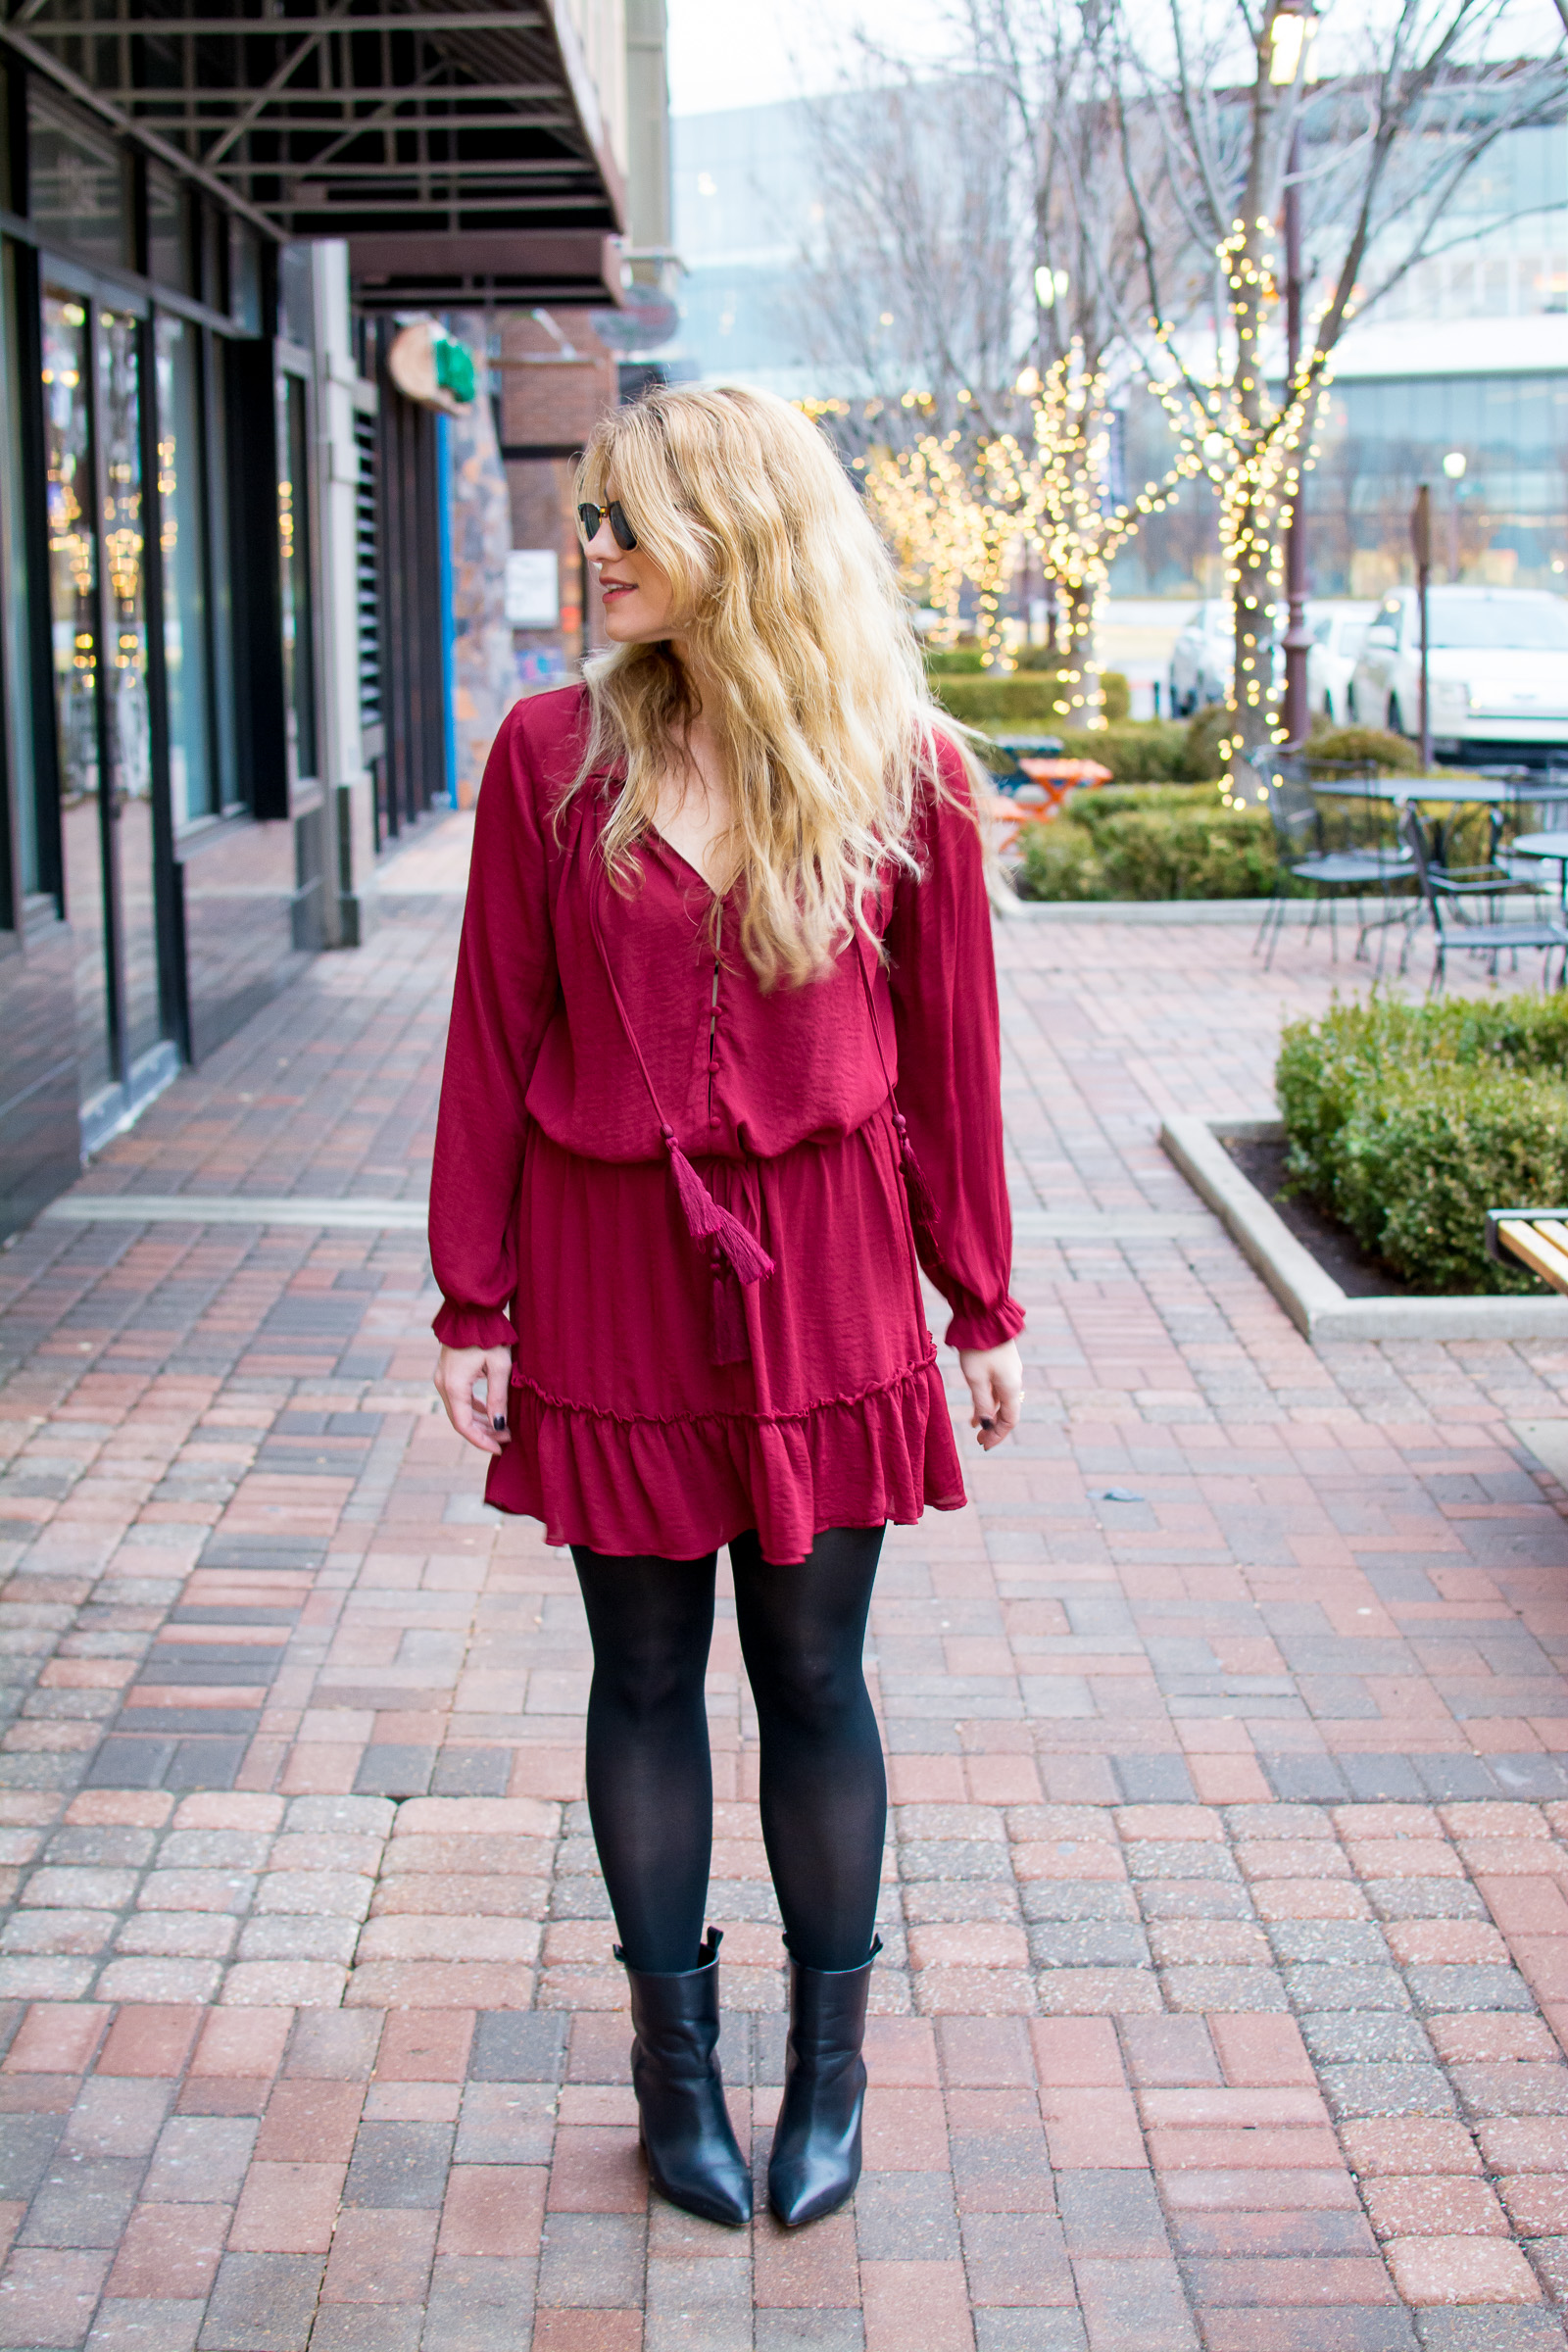 Burgundy Ankle Boots with Black Leggings Outfits (4 ideas